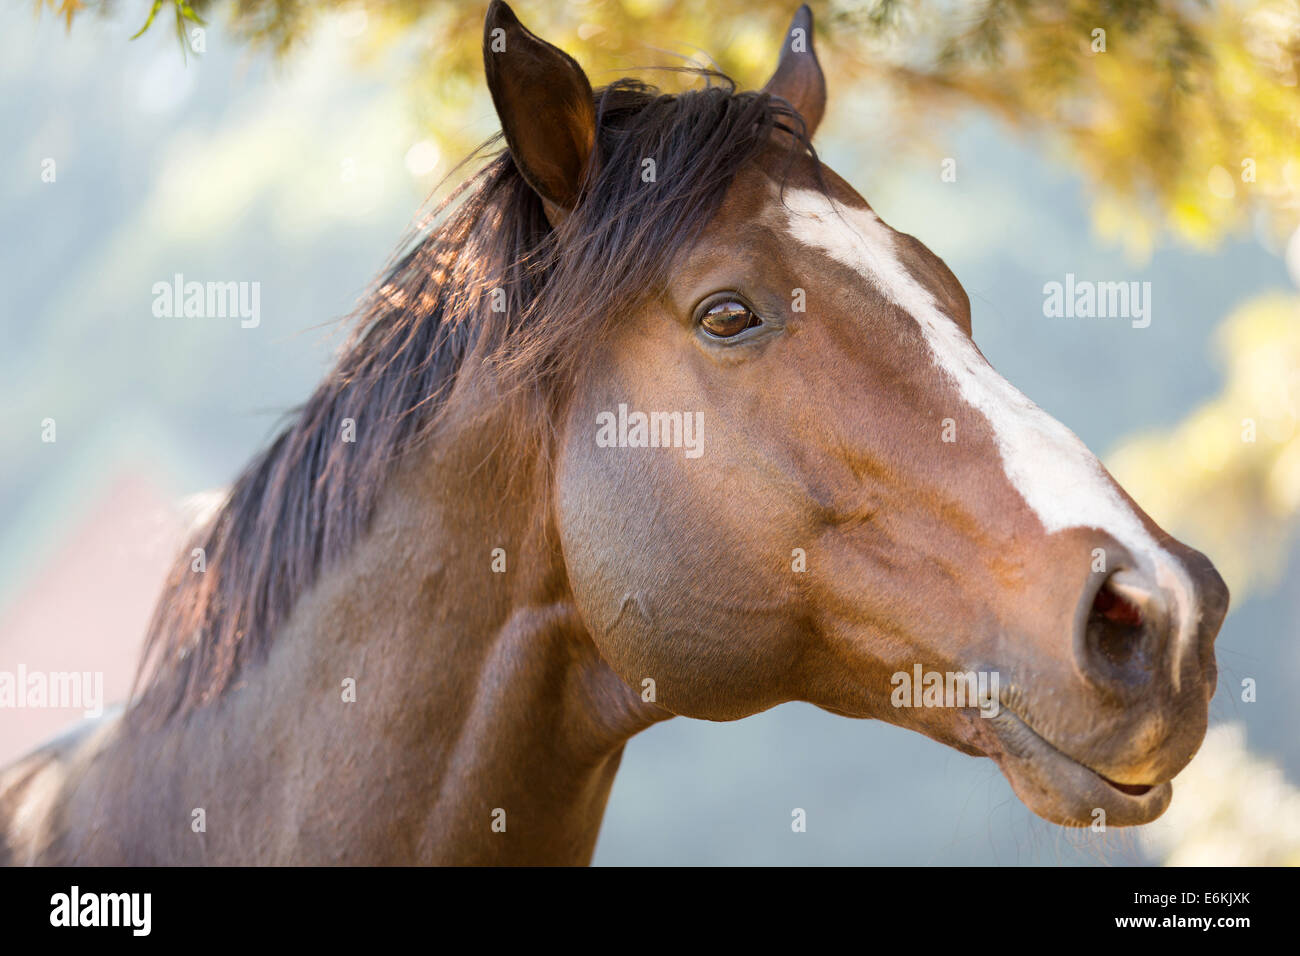 close up of an purebred racing horse Stock Photo